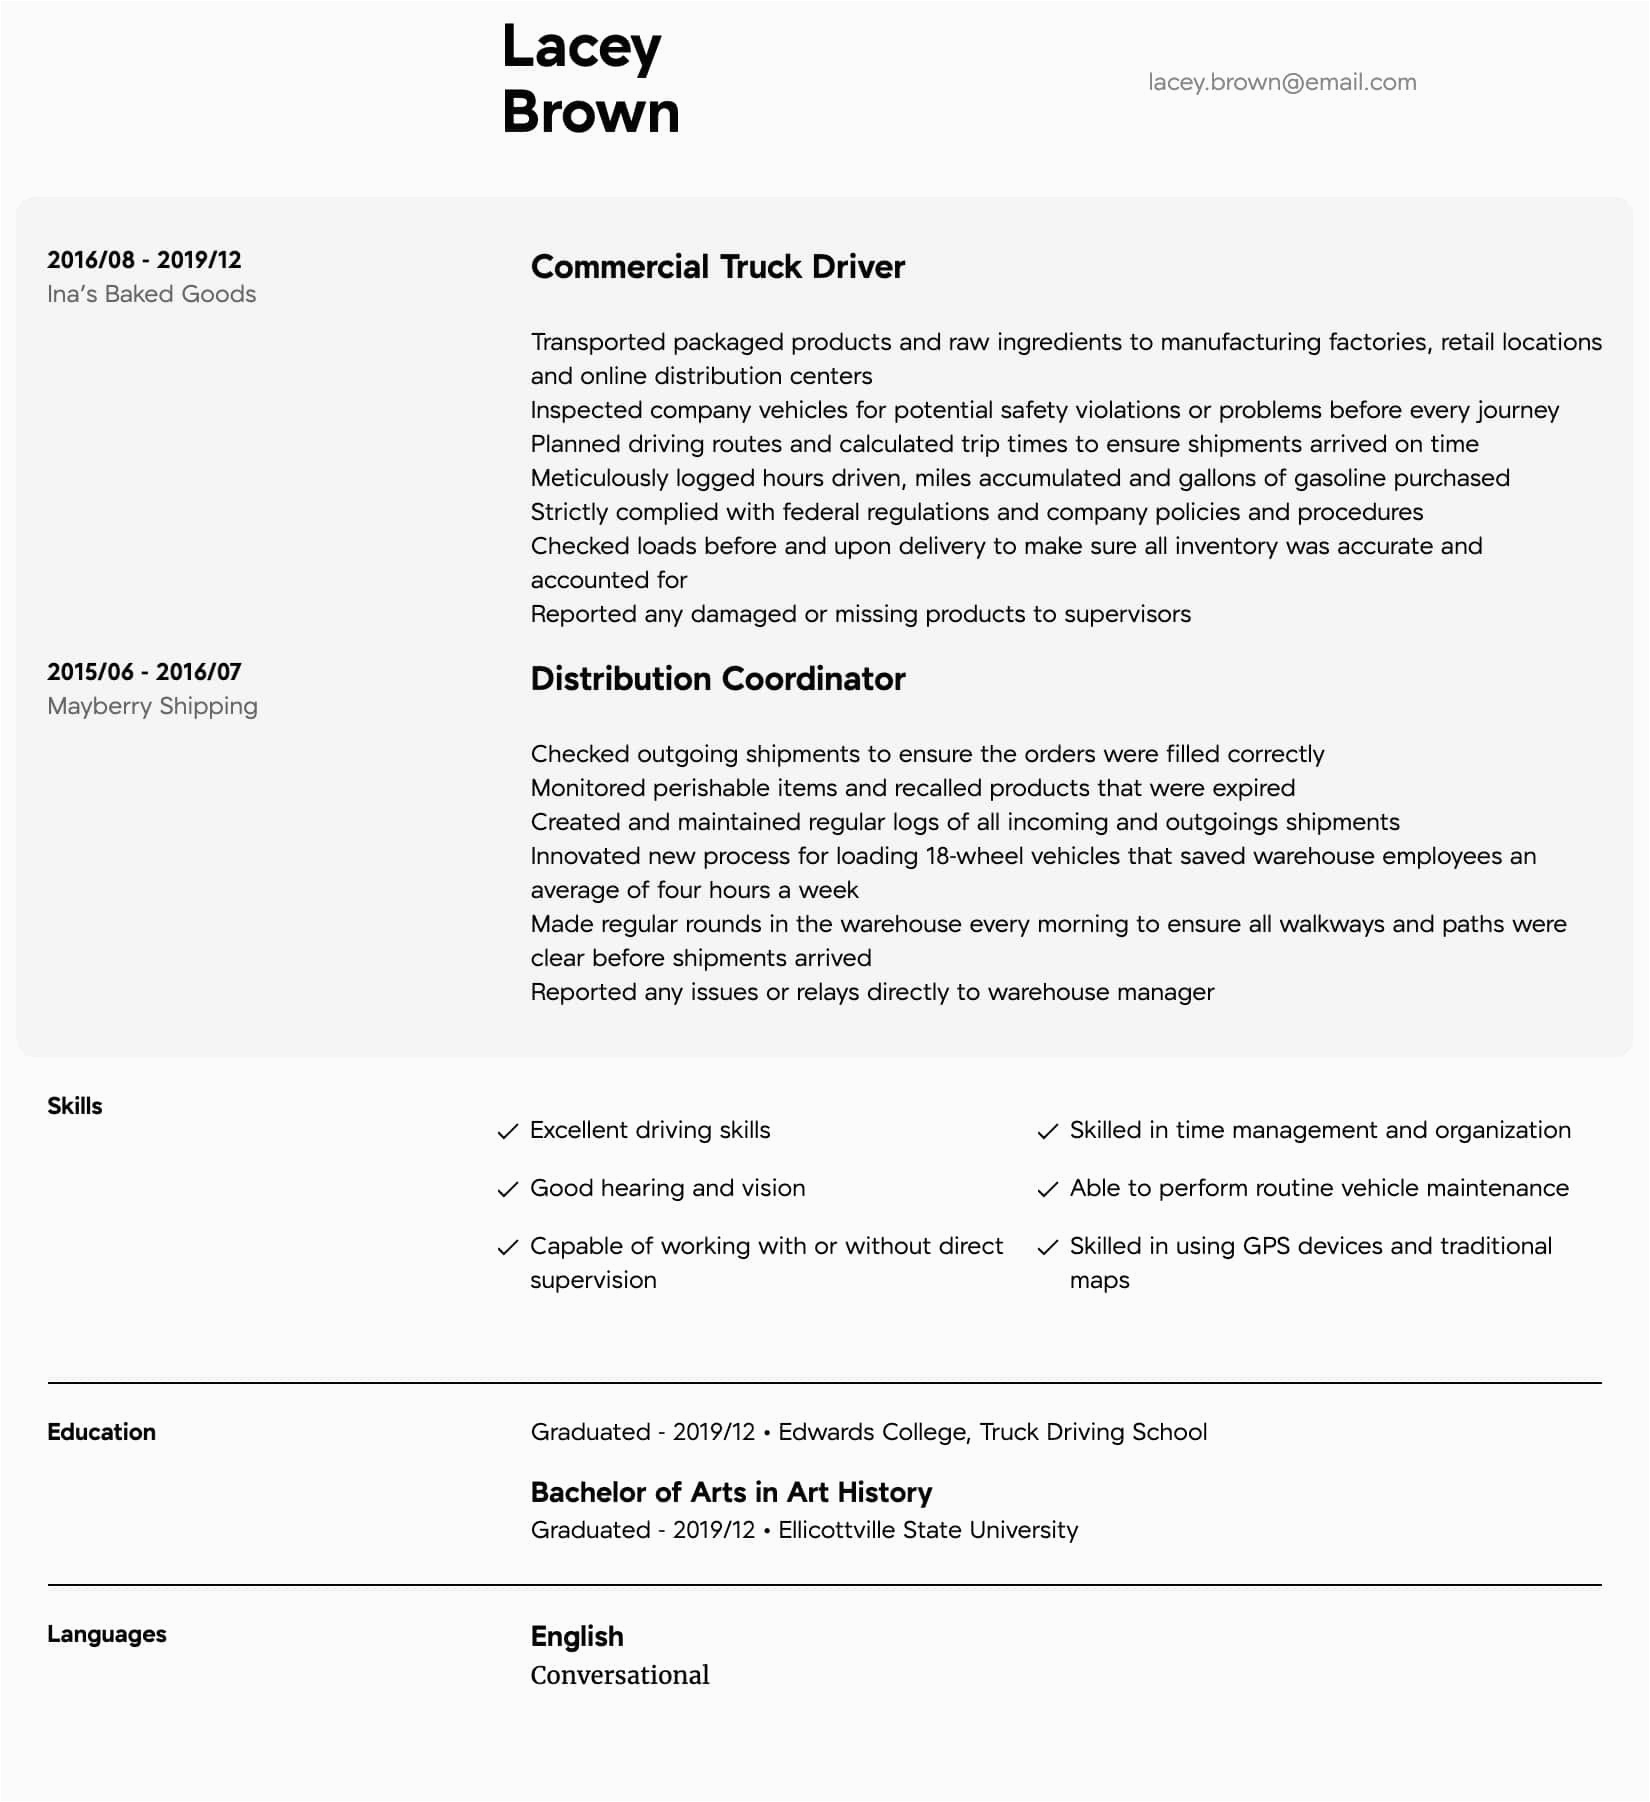 Sample Resume for Truck Driver with Experience Truck Driver Resume Samples